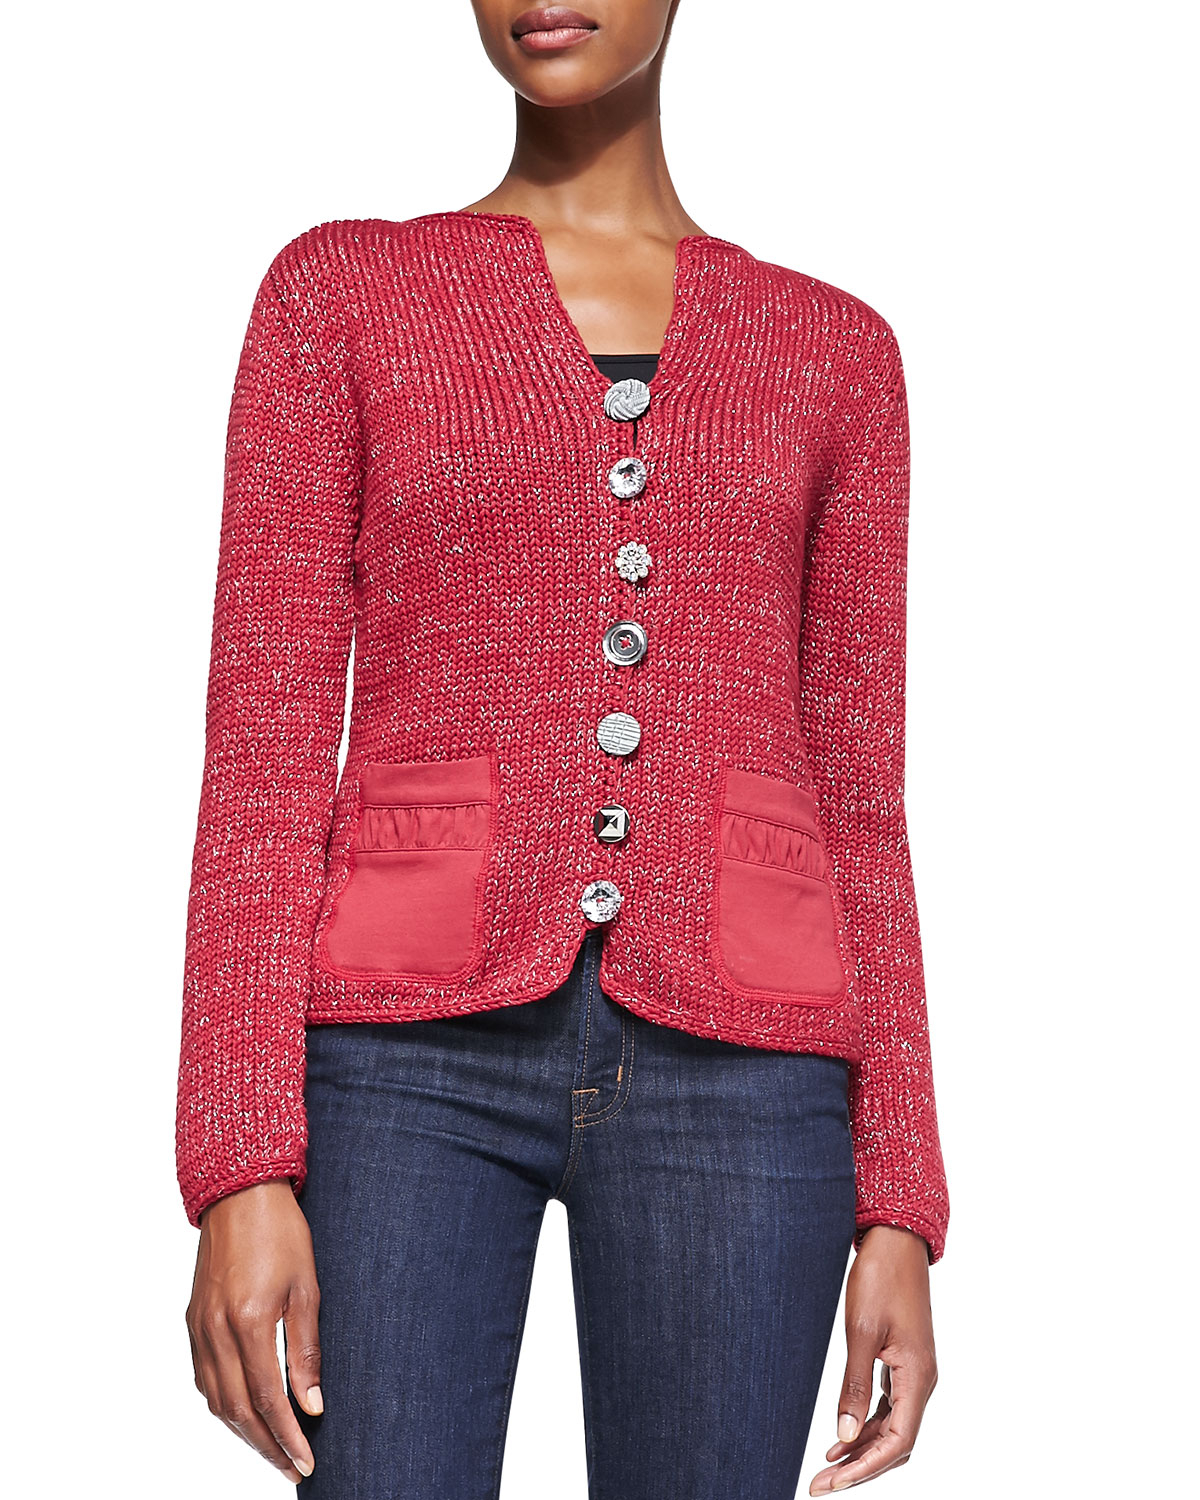 Lyst - Pure Handknit Fall Breeze Cardigan W/ Jeweled Buttons in Red